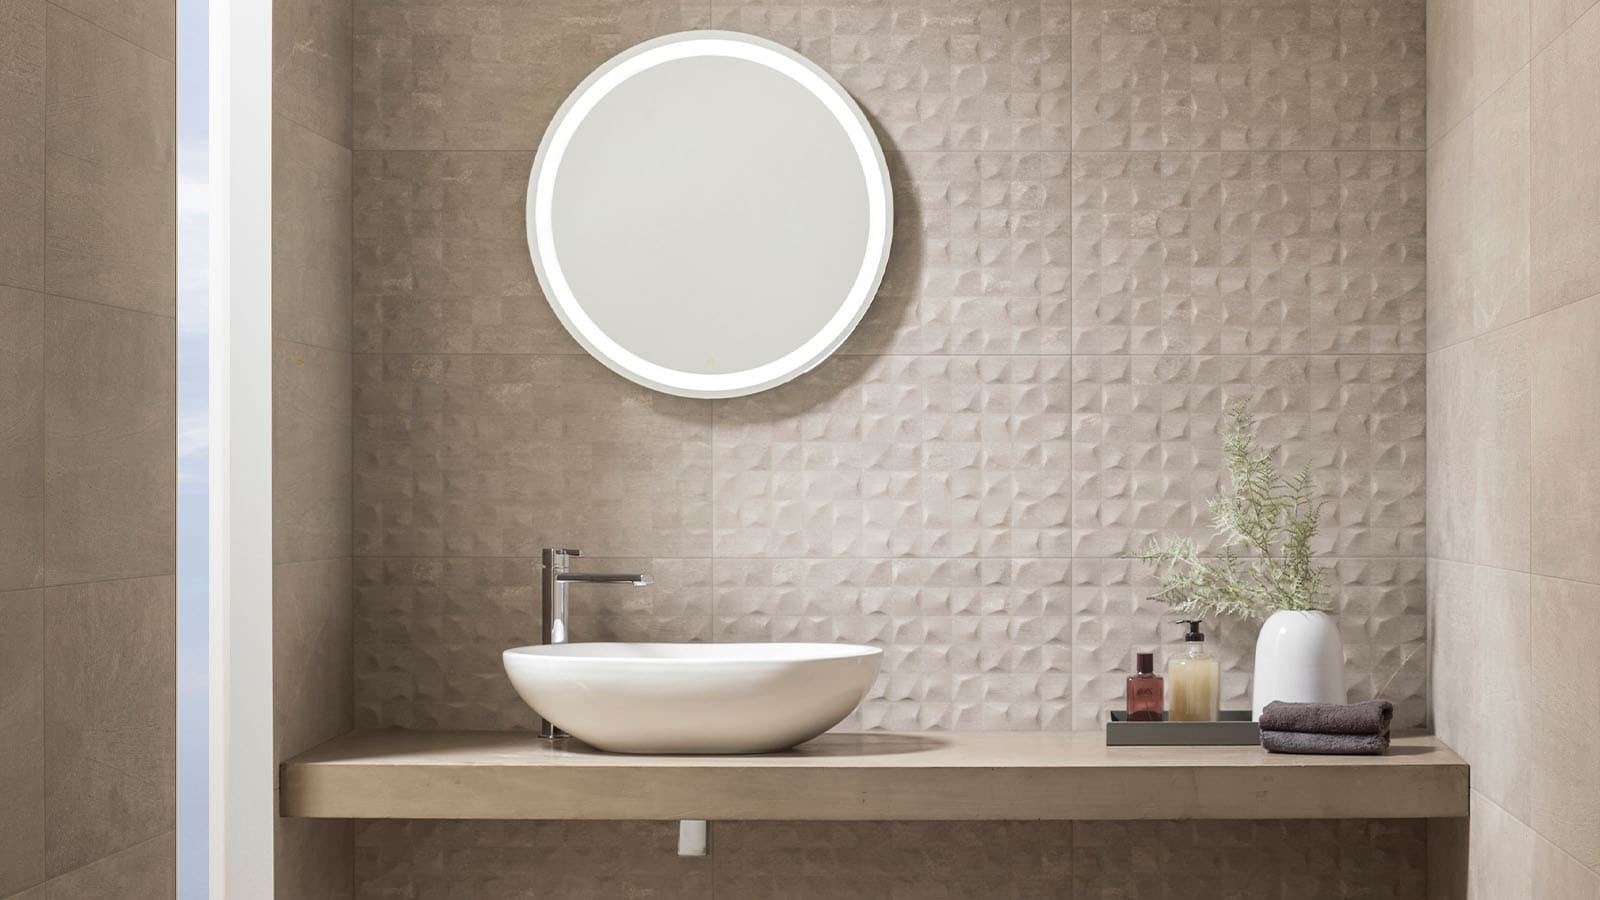 Types of tile textures to add greater depth to home décor